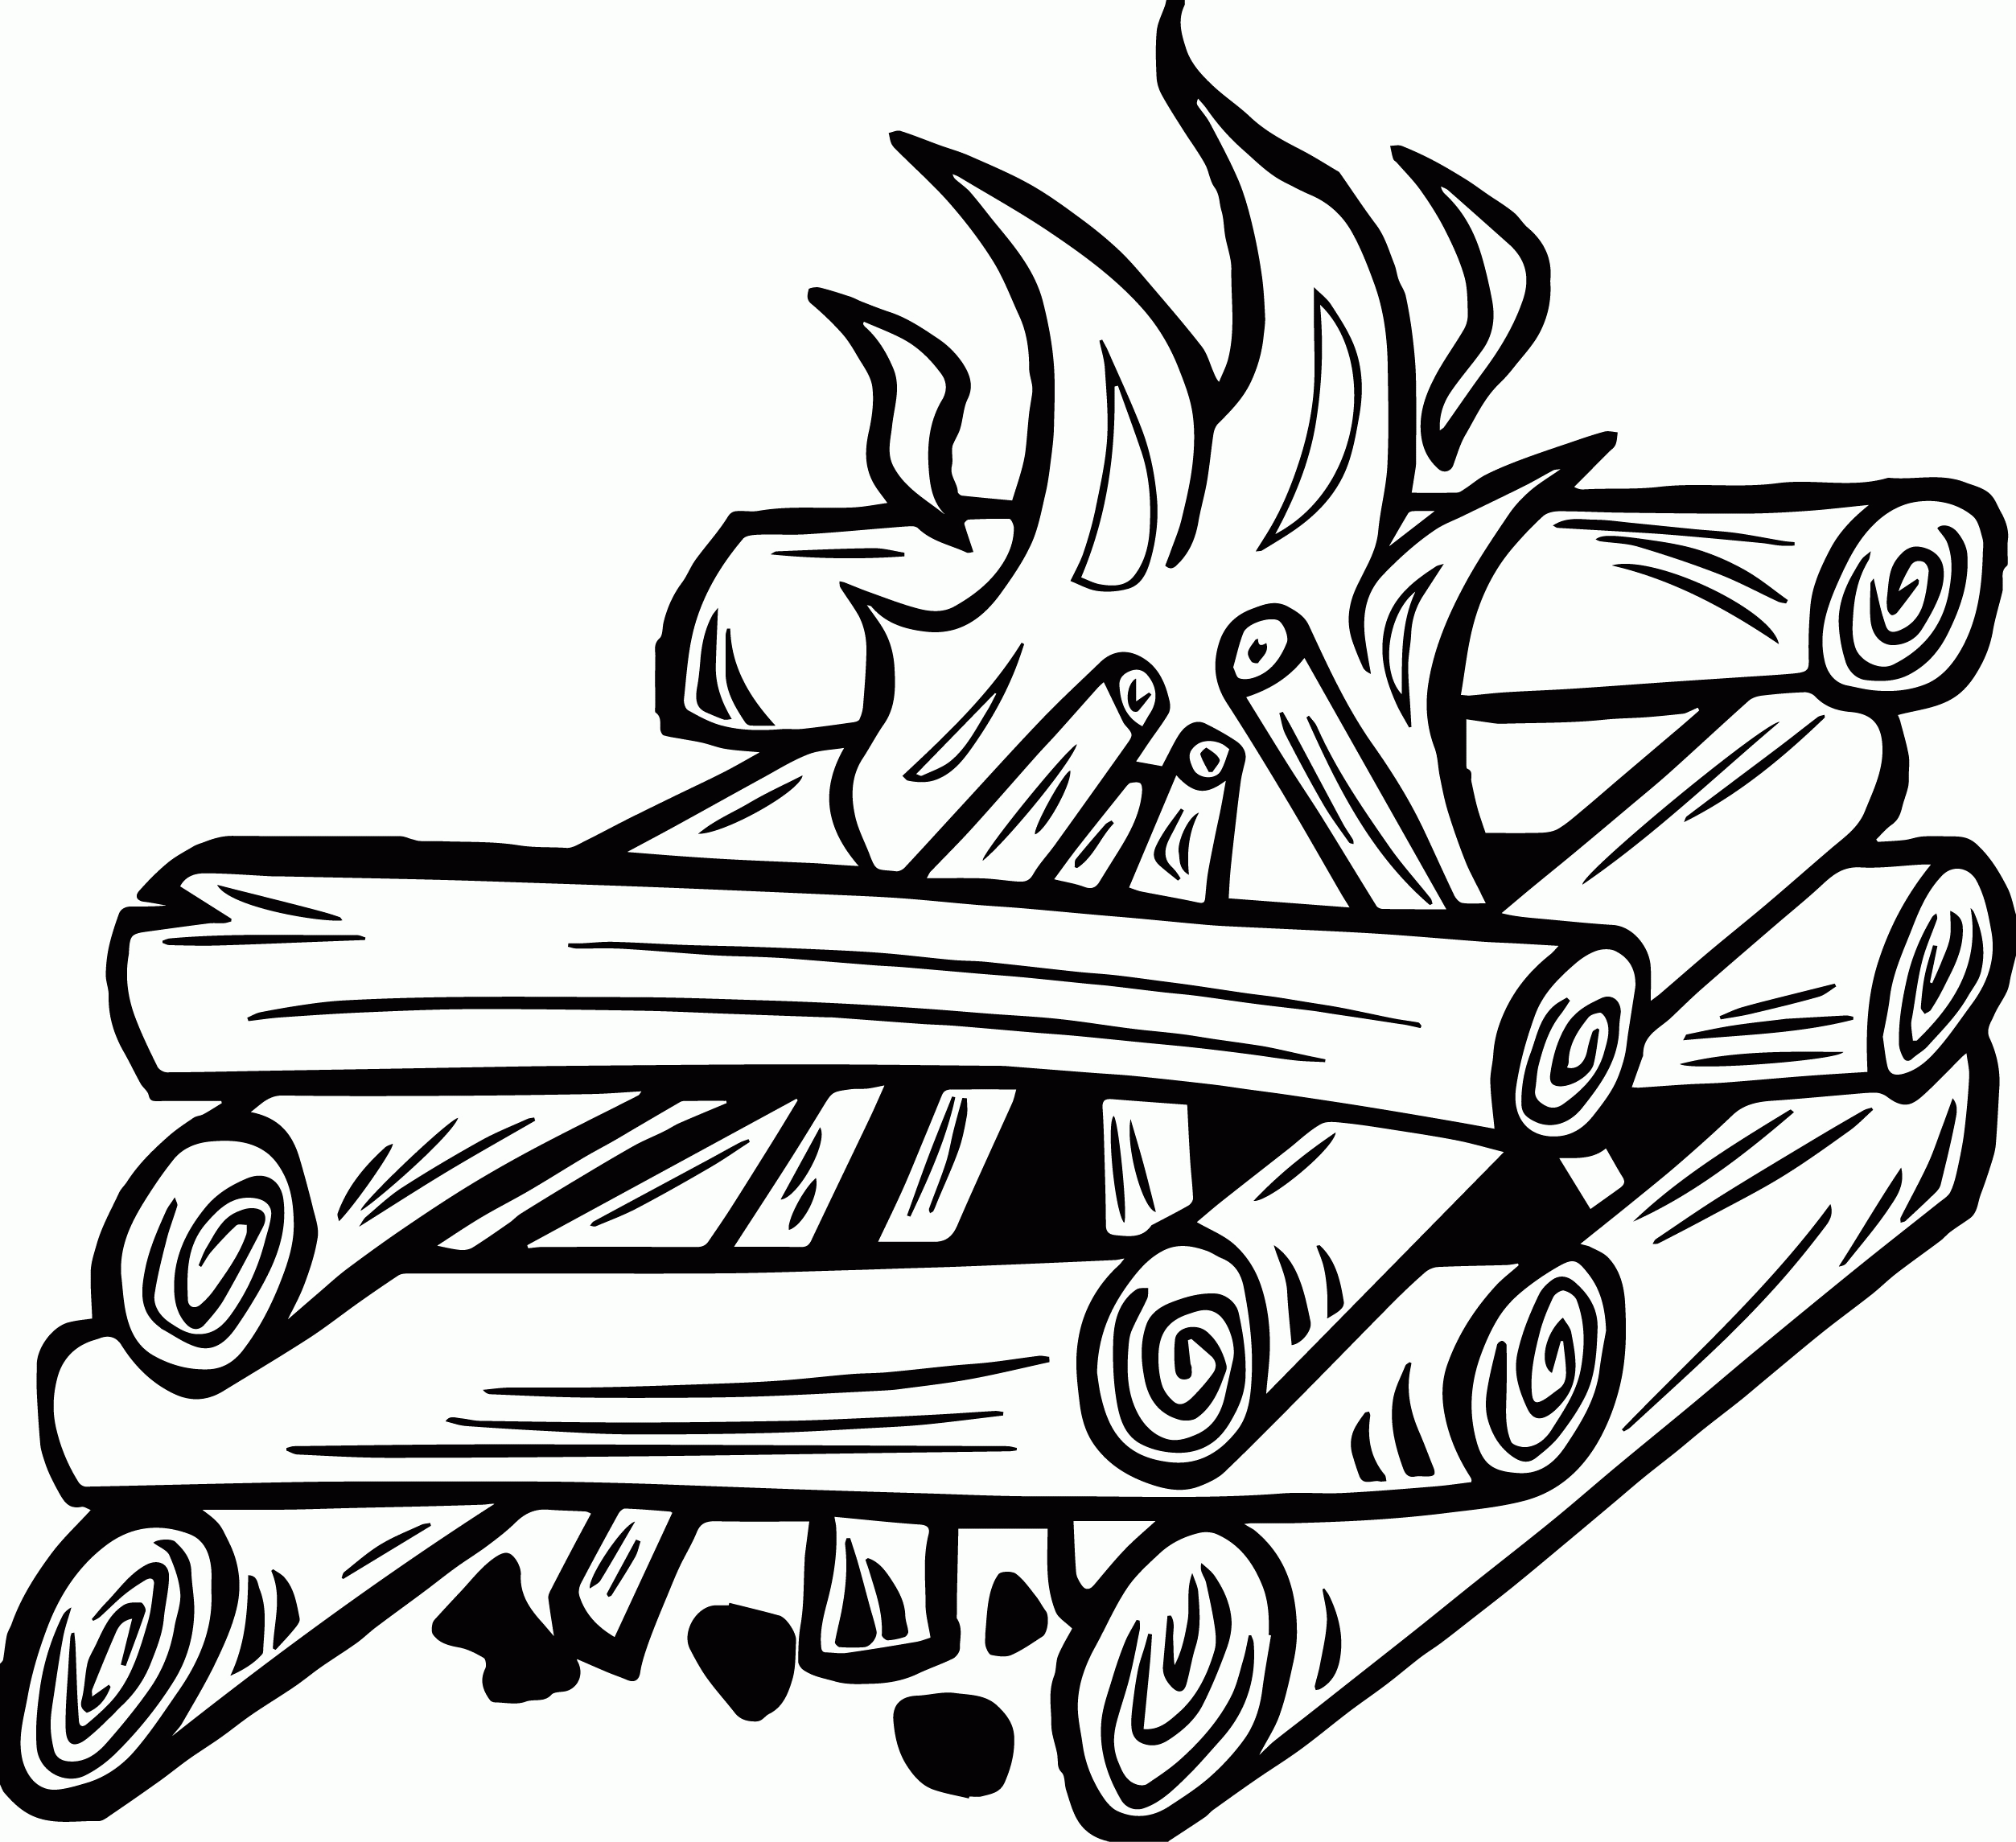 Campfire Camp Fire Coloring Page | Wecoloringpage